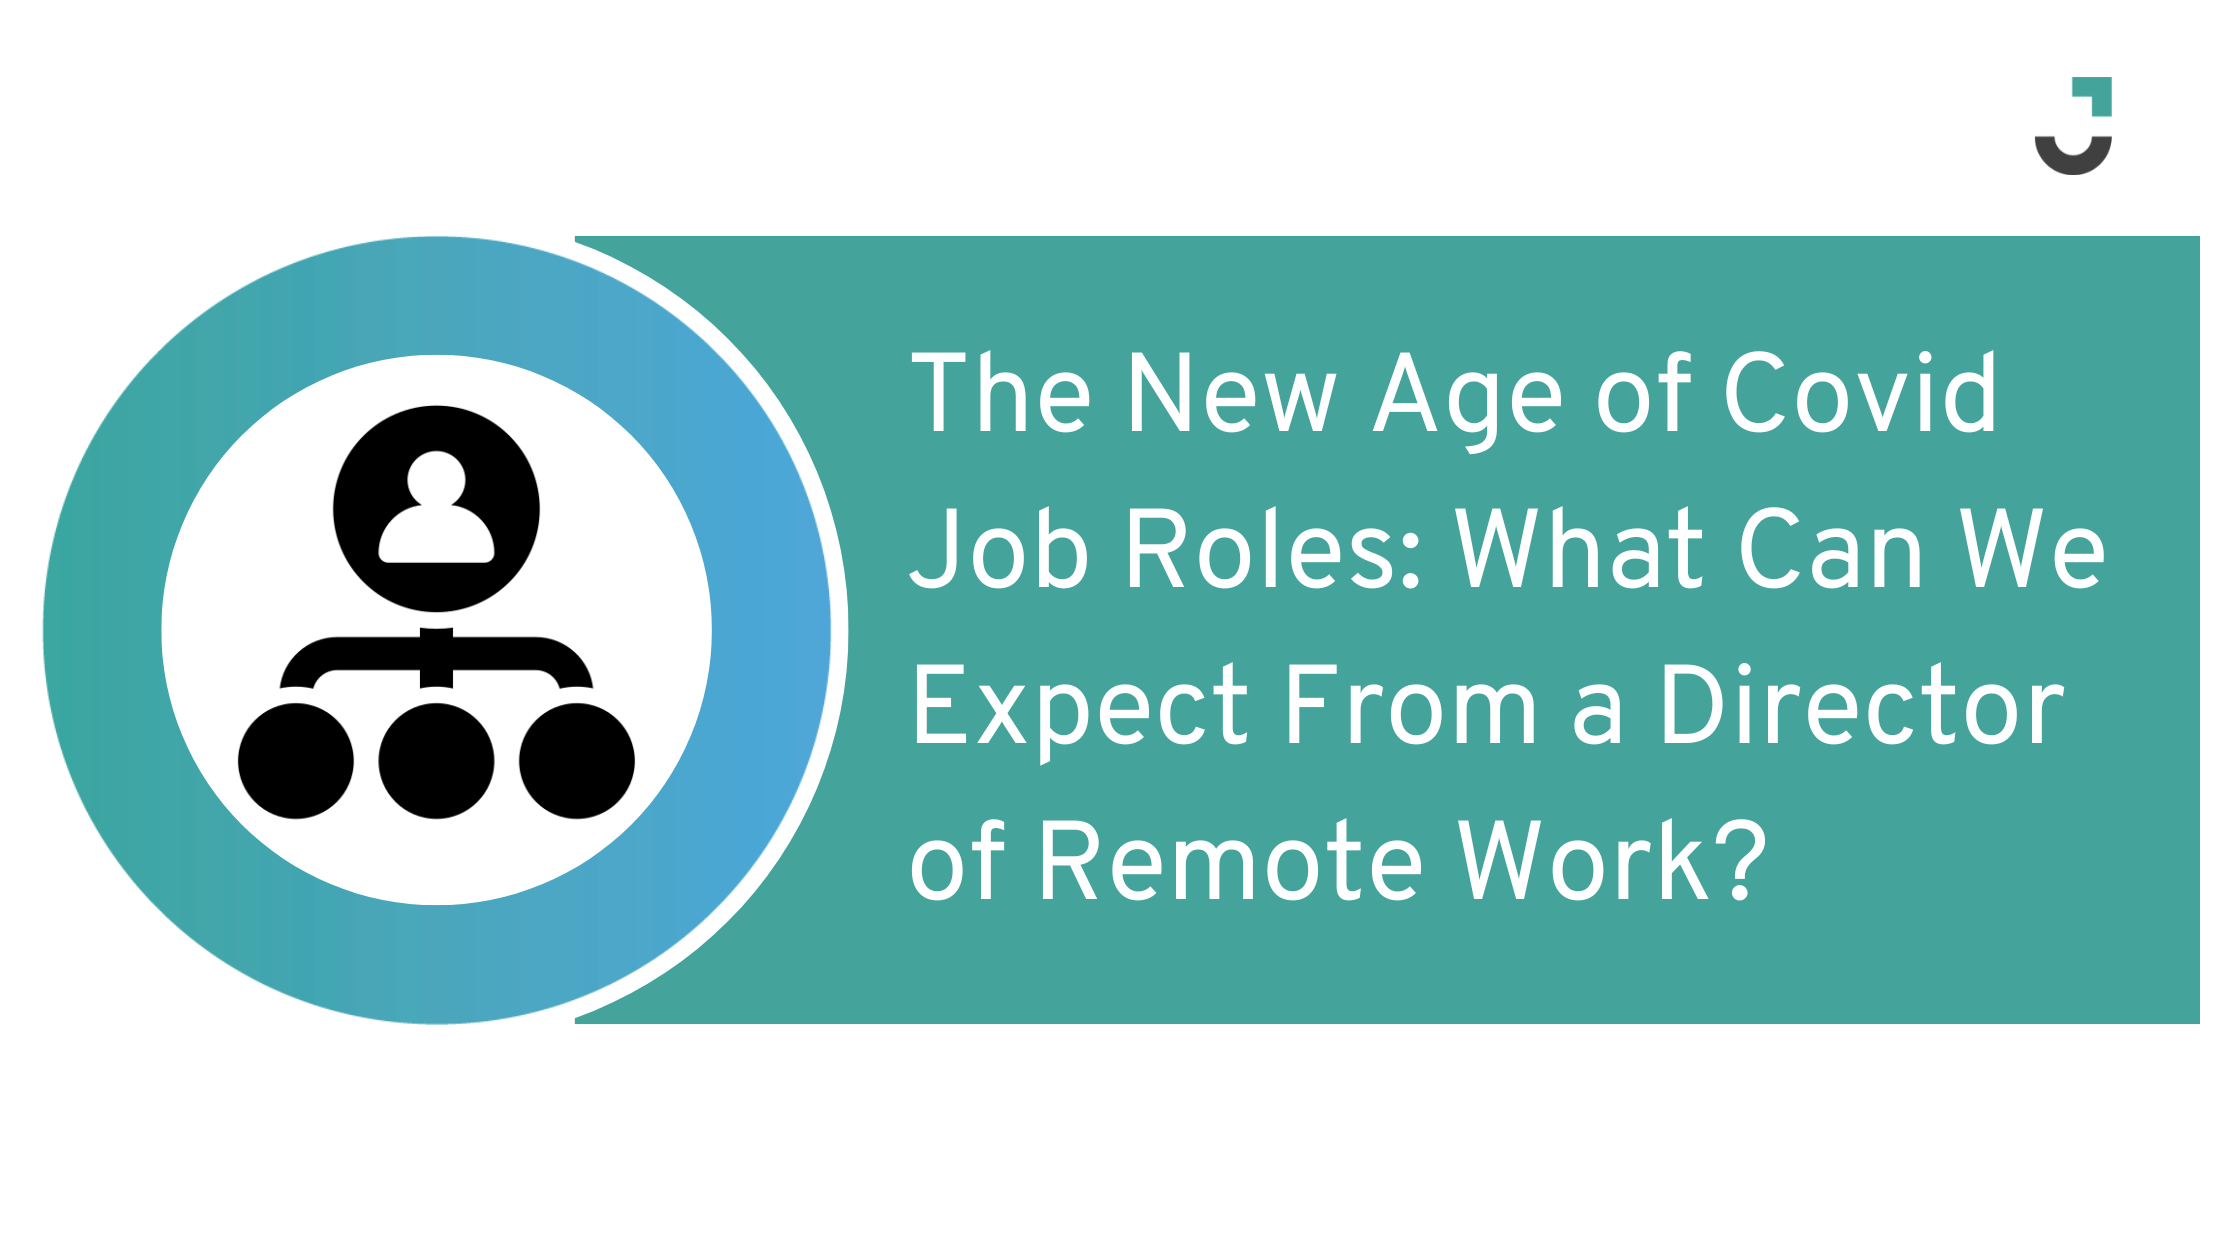 The New Age of Covid Job Roles: What Can We Expect From a Director of Remote Work?